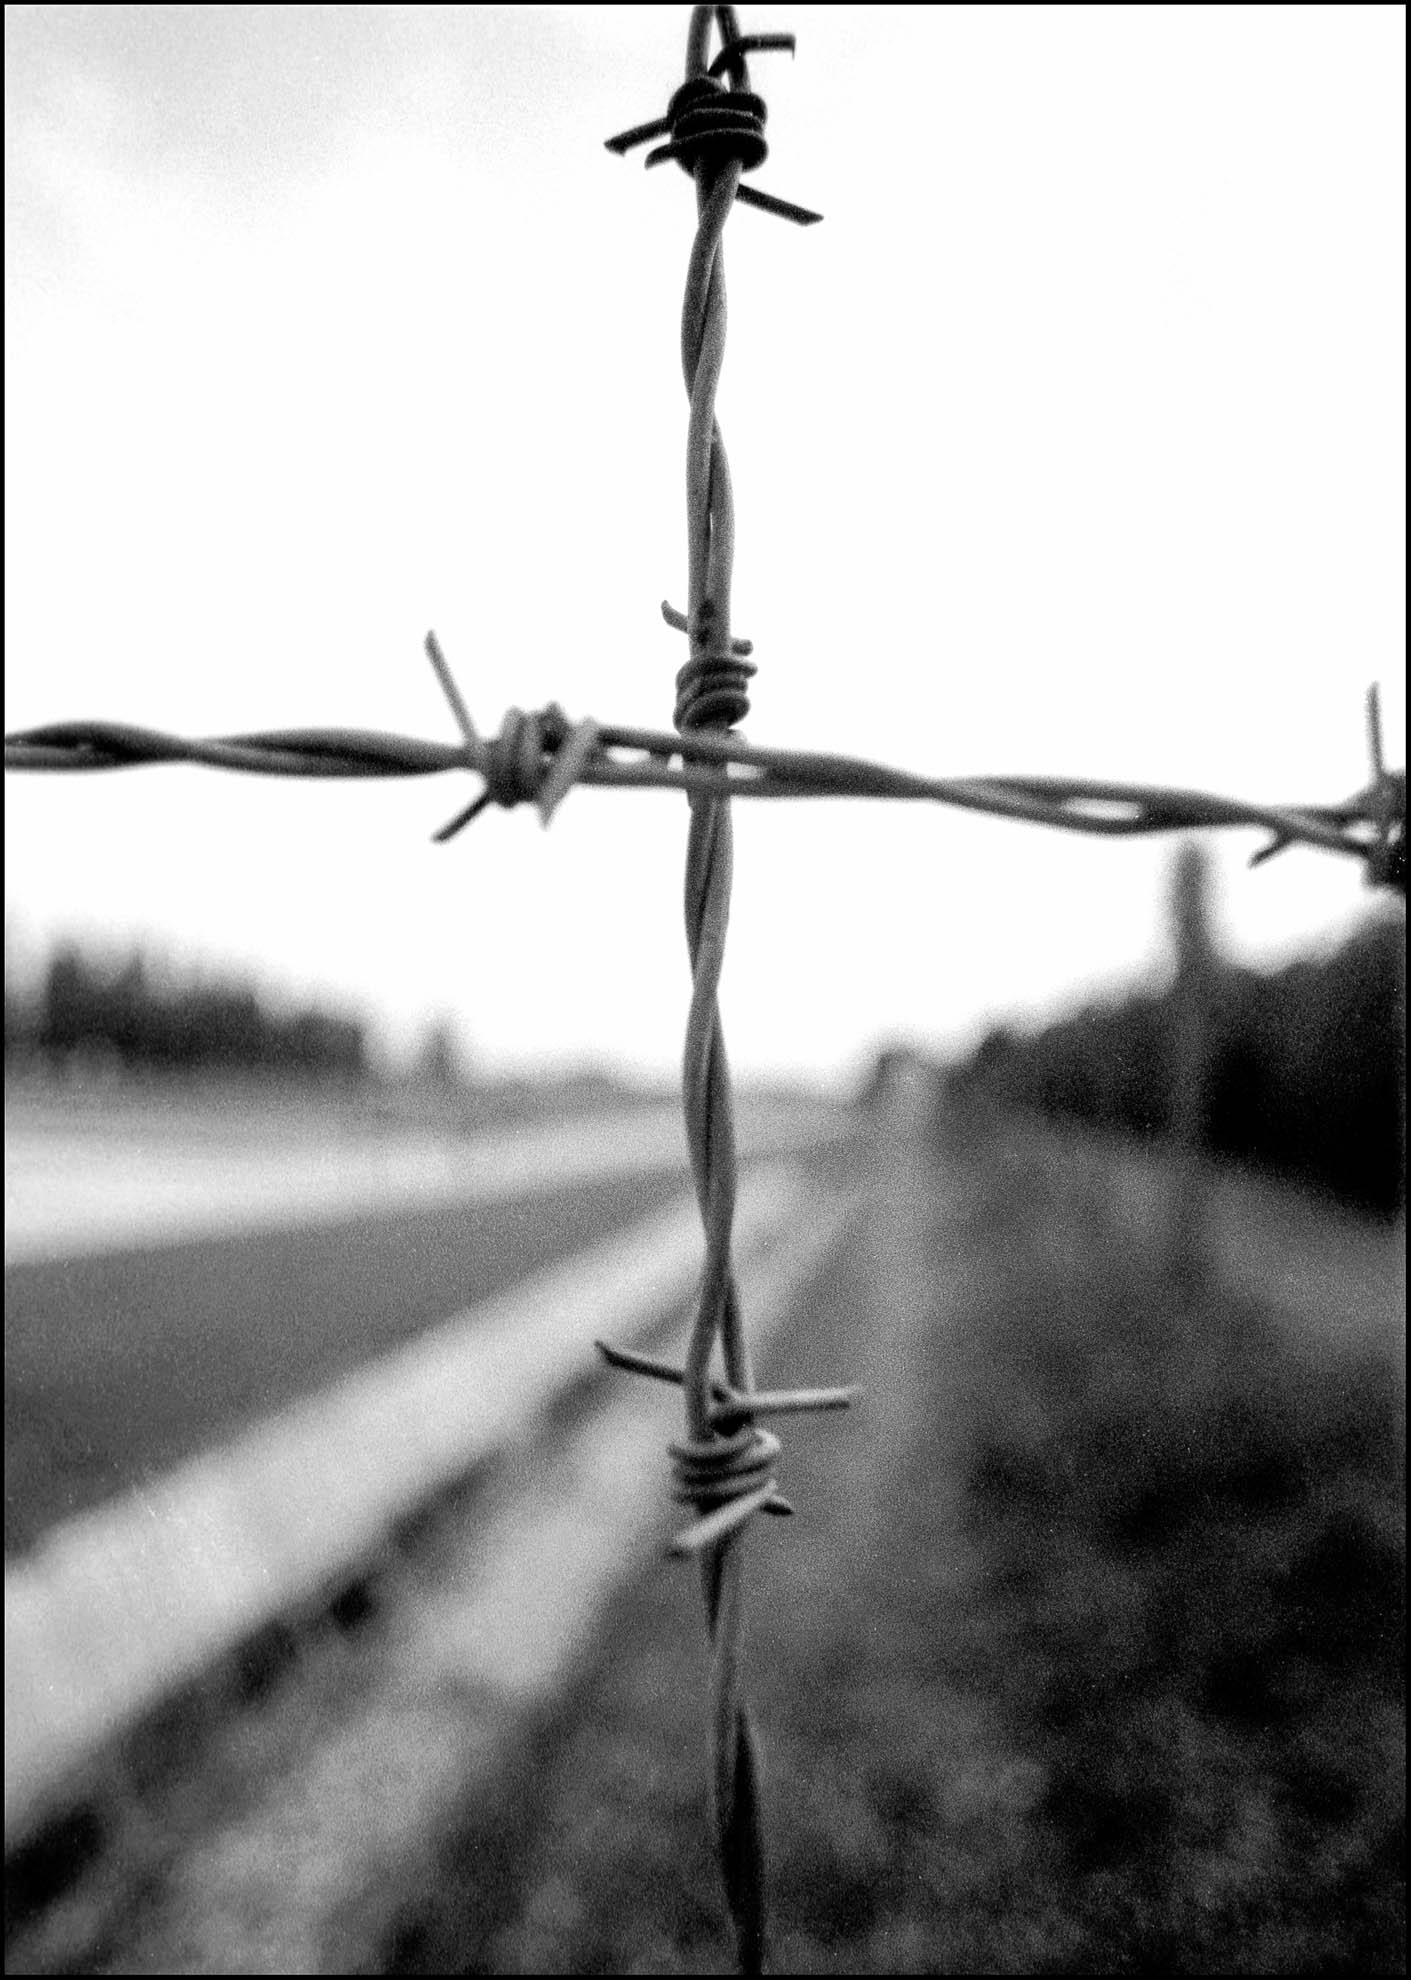 death penalty, photography, photos, execution, prison, documentary, concentration camp, germany, religious, cross